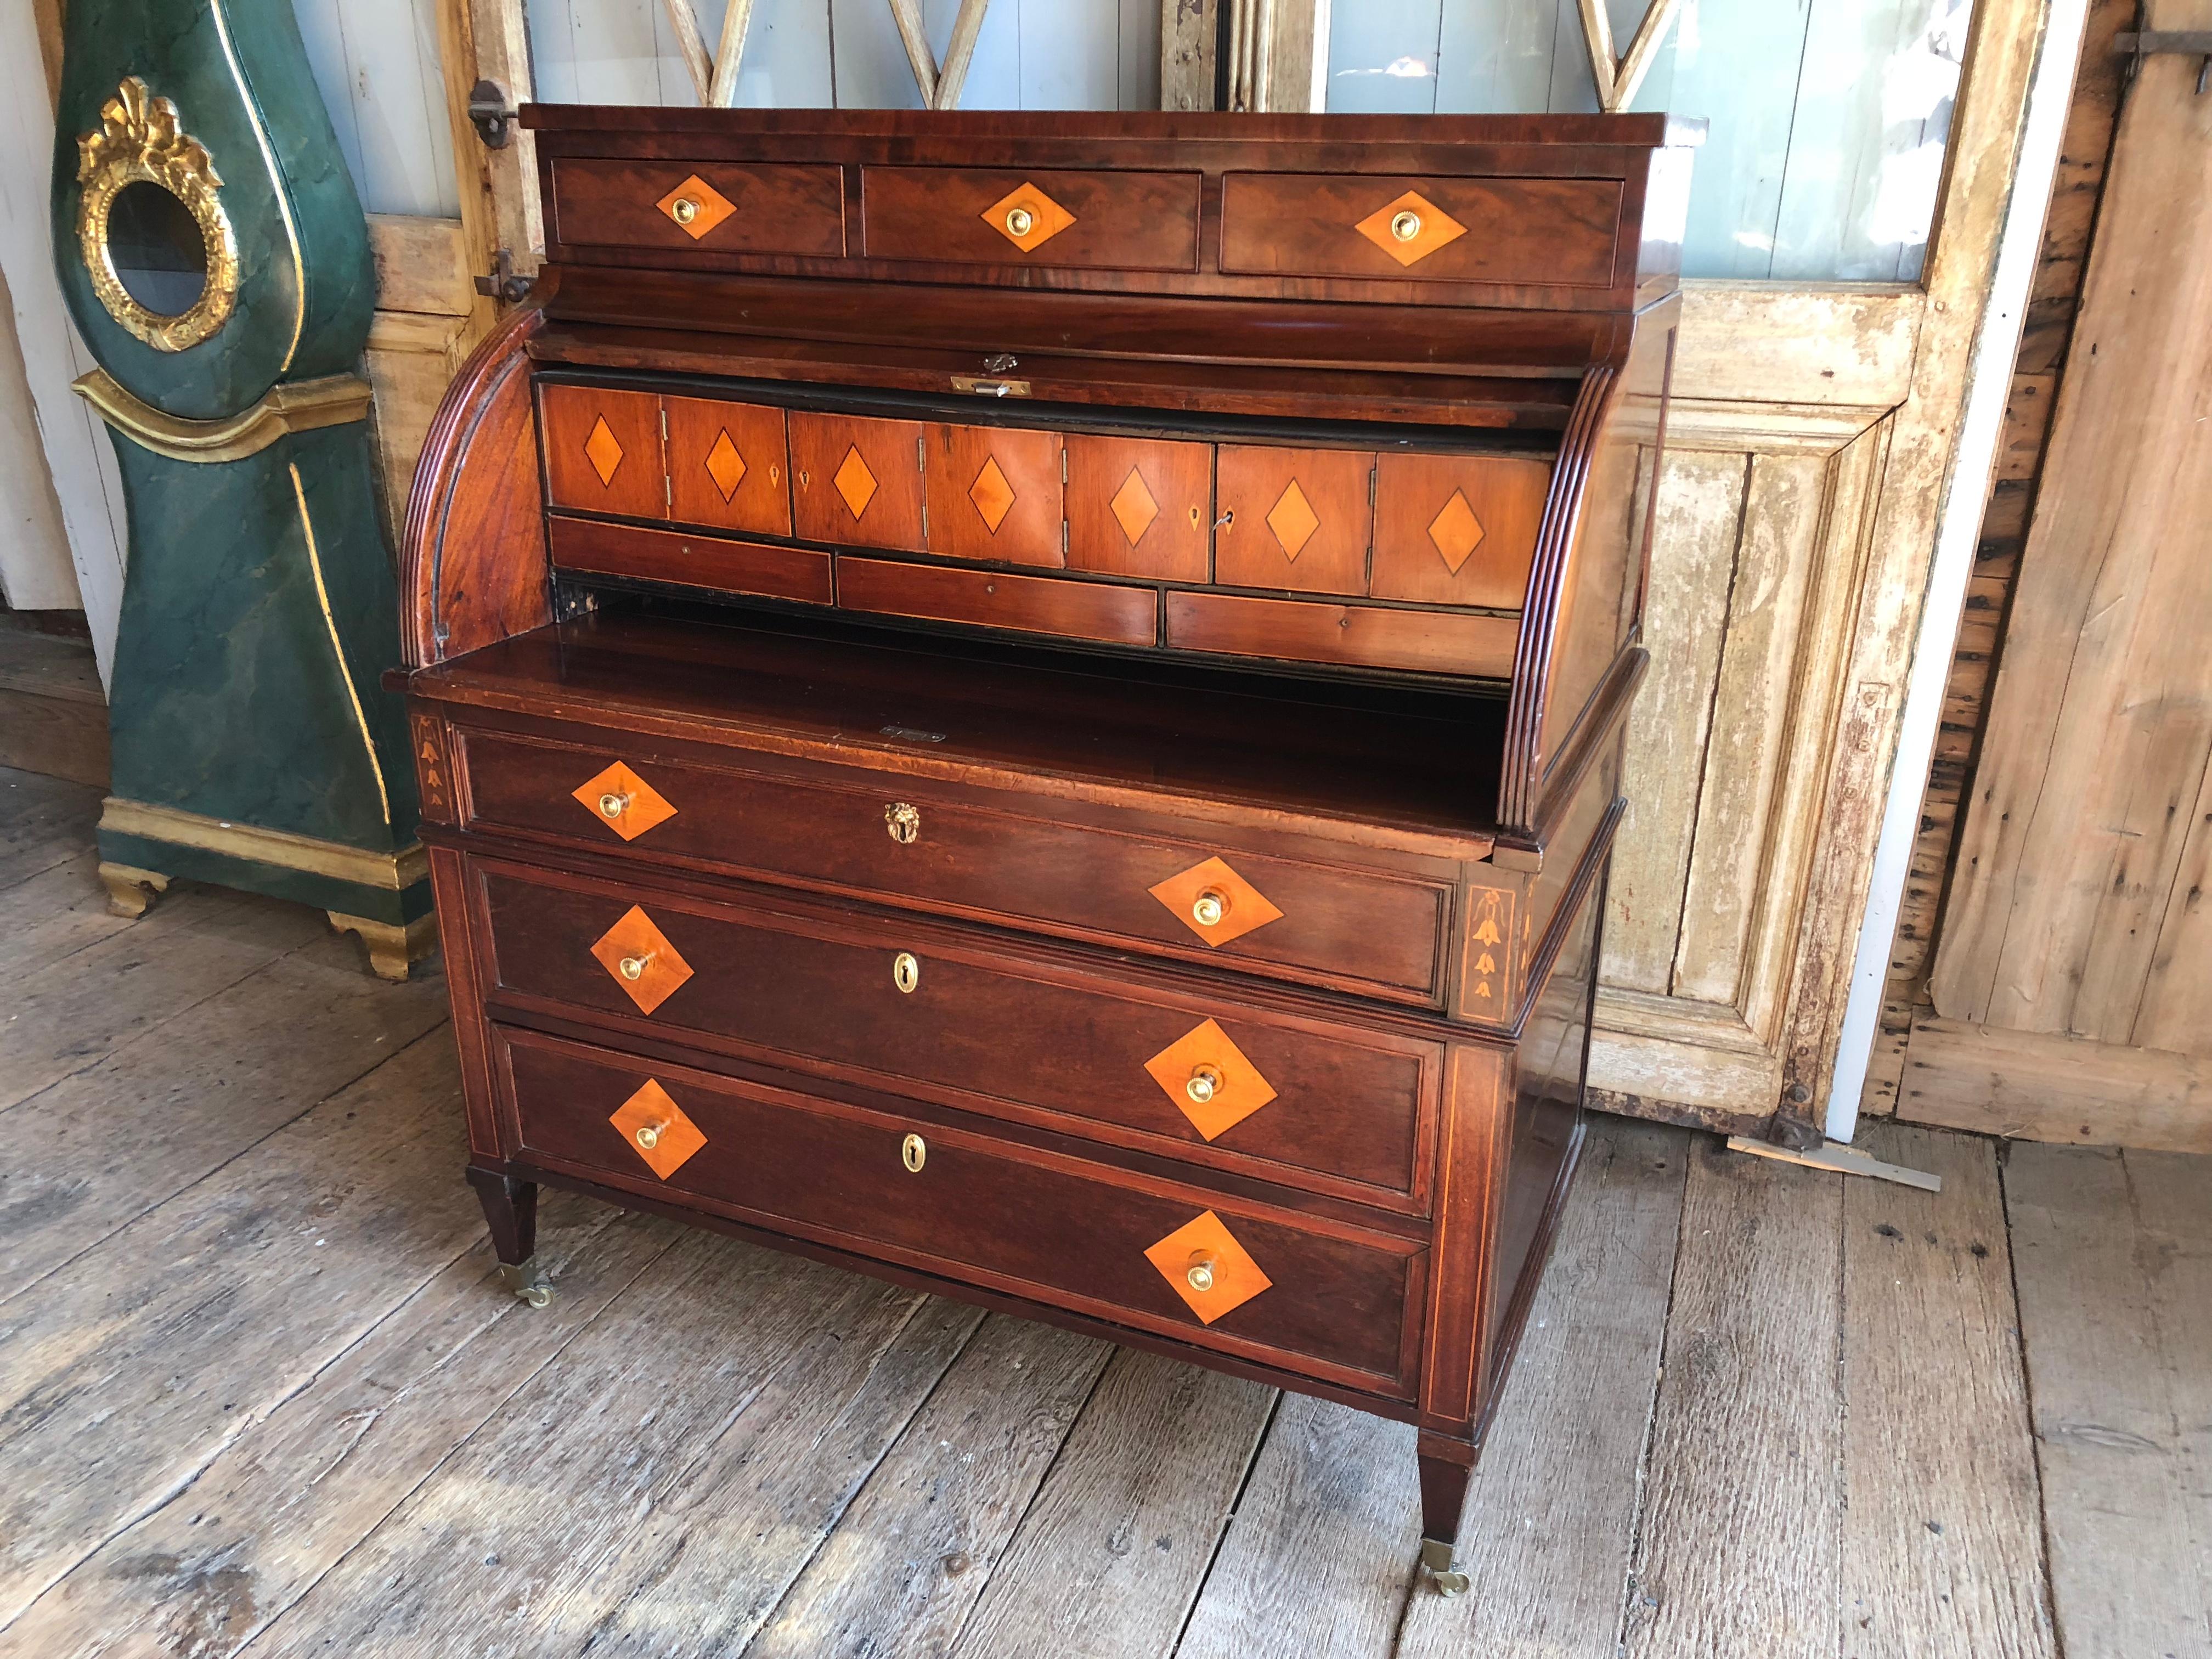 An early 19th century neoclassical cylinder desk in inlaid mahogany, with interior compartments and three lowernfull-legnth drawers, likely Dutch. From the personal collection of interior designer William Hodgins, Boston.